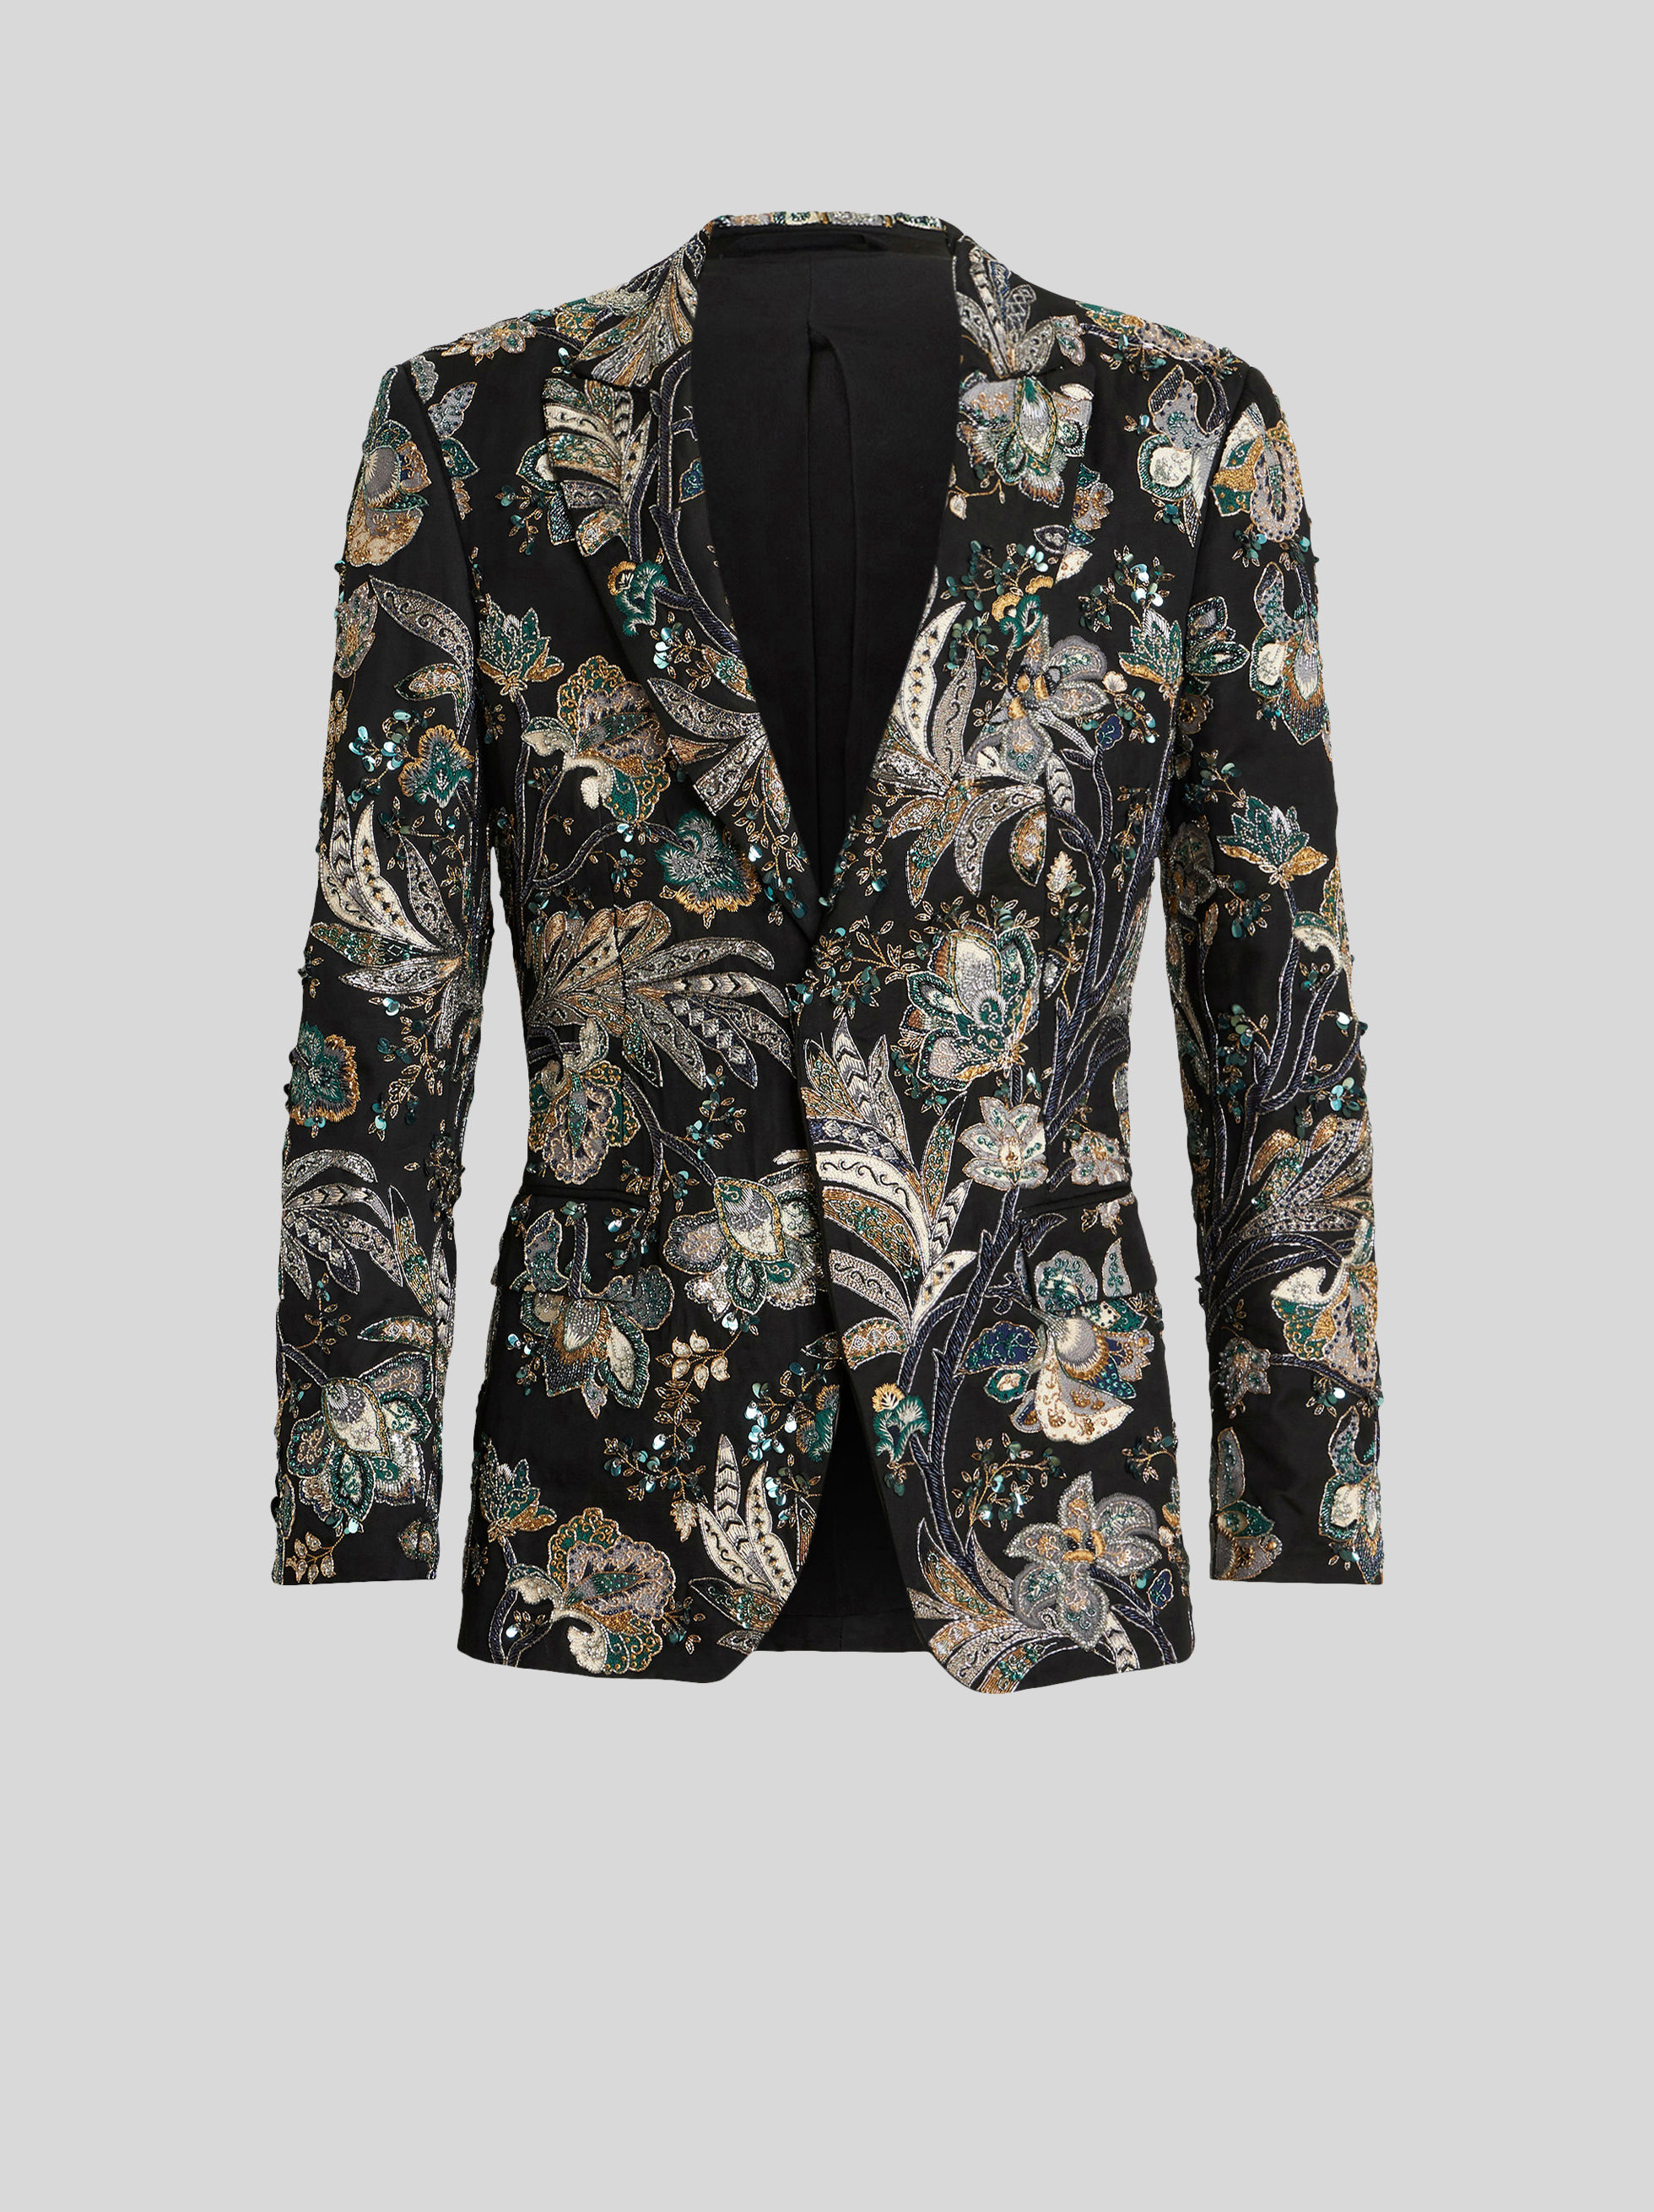 FLORAL PAISLEY JACKET WITH BEADS